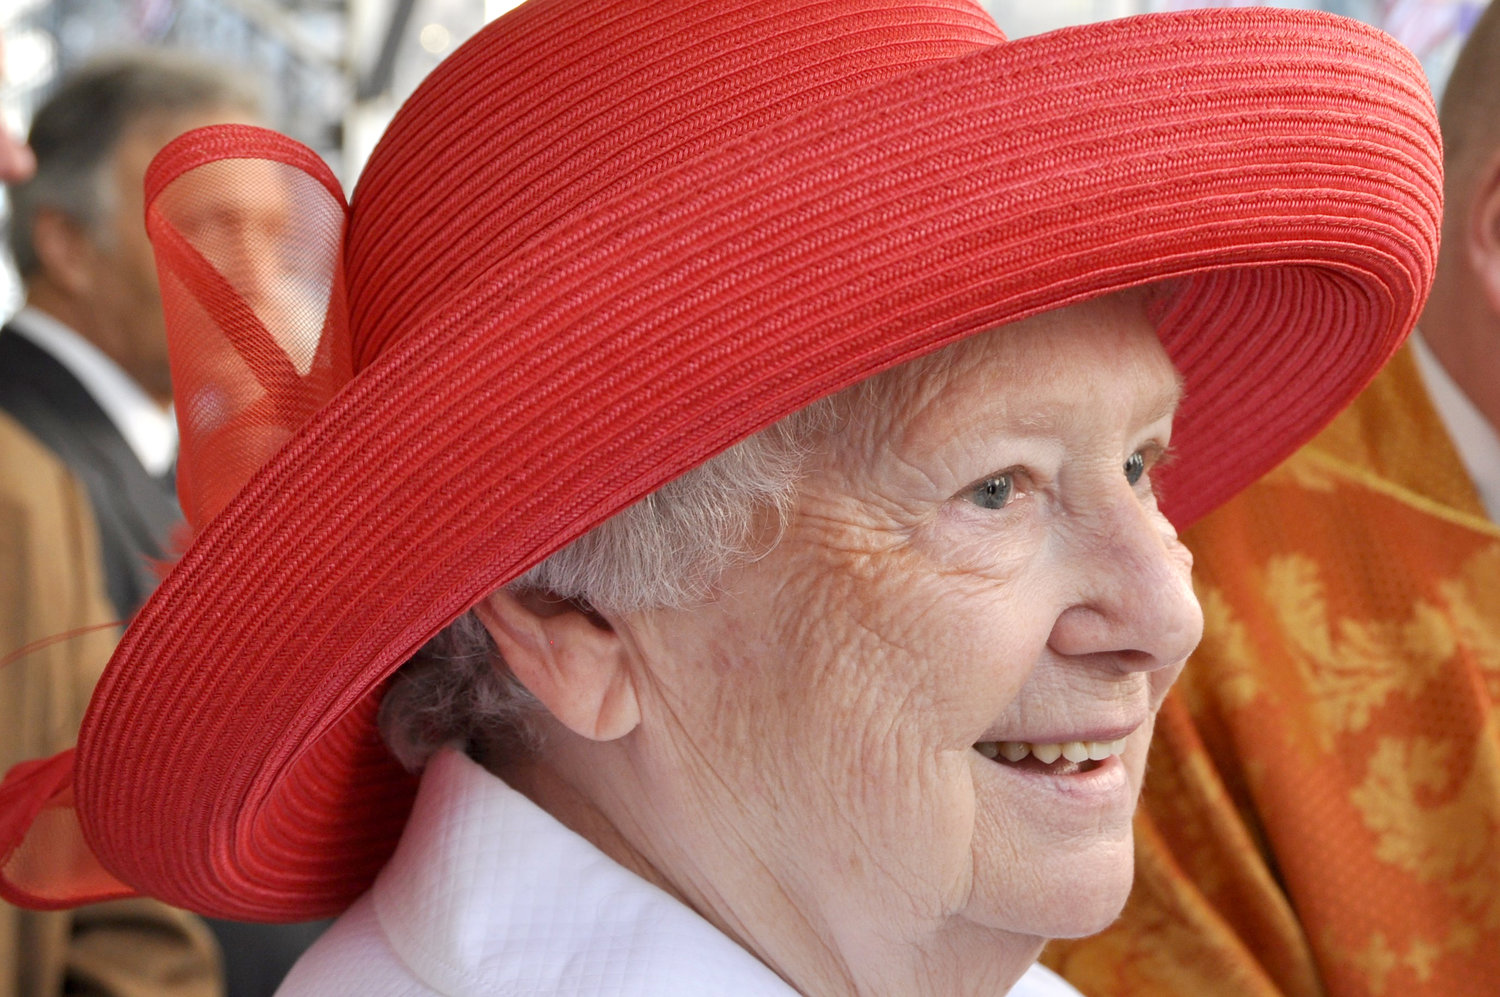 Shirley Jean Radcliffe Dolan sports a stylish hat outside St. Patrick’s Cathedral on Easter Sunday 2010. Mrs. Dolan died March 12 at age 93.